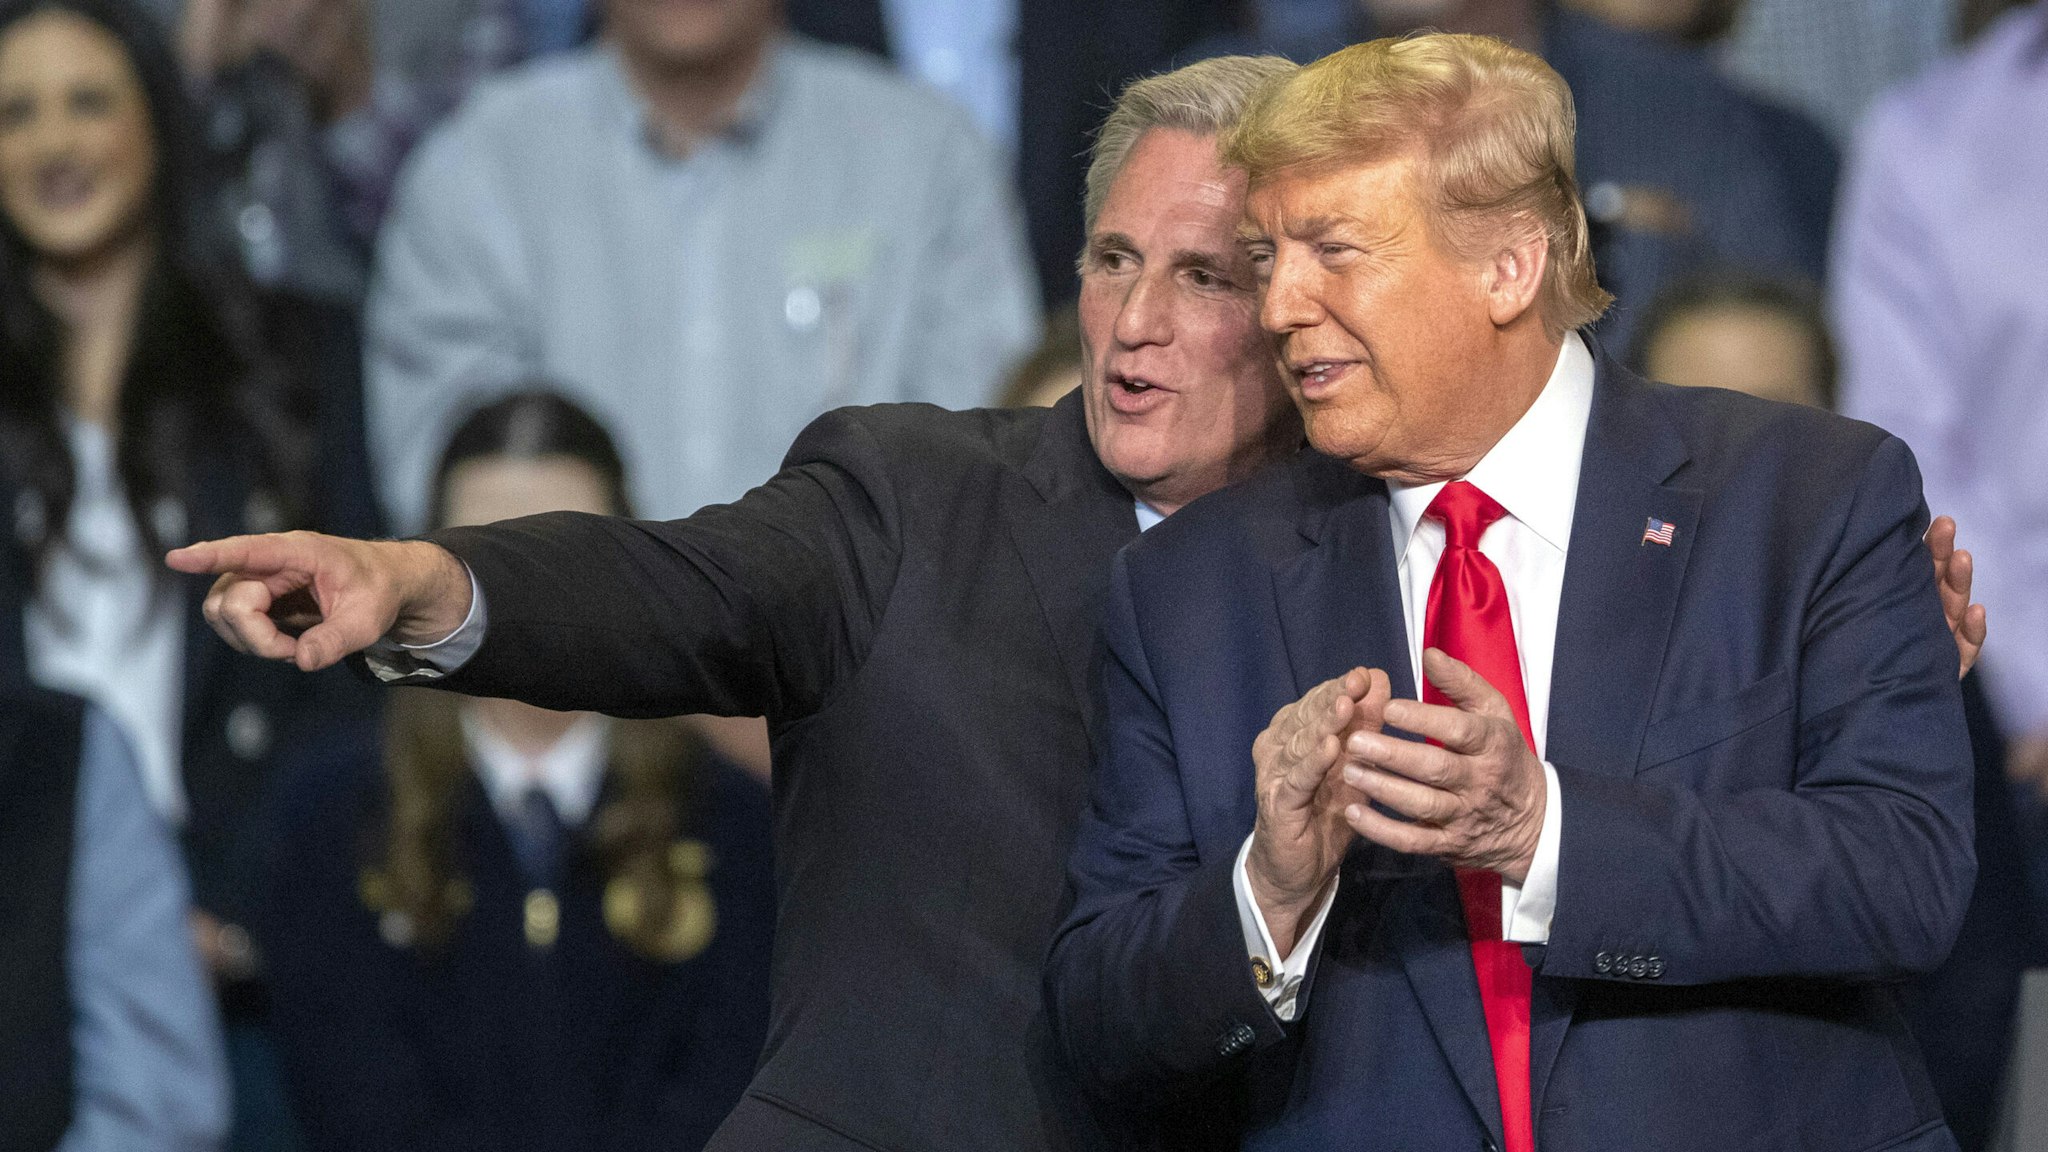 BAKERSFIELD, CA - FEBRUARY 19: House Minority Leader Kevin McCarthy and U.S. President Donald Trump attend a legislation signing rally with local farmers on February 19, 2020 in Bakersfield, California. The presidential signing ushers in his administration's new rules altering how federal authorities decide who gets water and how much in California, sending more water to farmers despite predictions that the changes will further threaten endangered species in the fragile San Joaquin Delta.